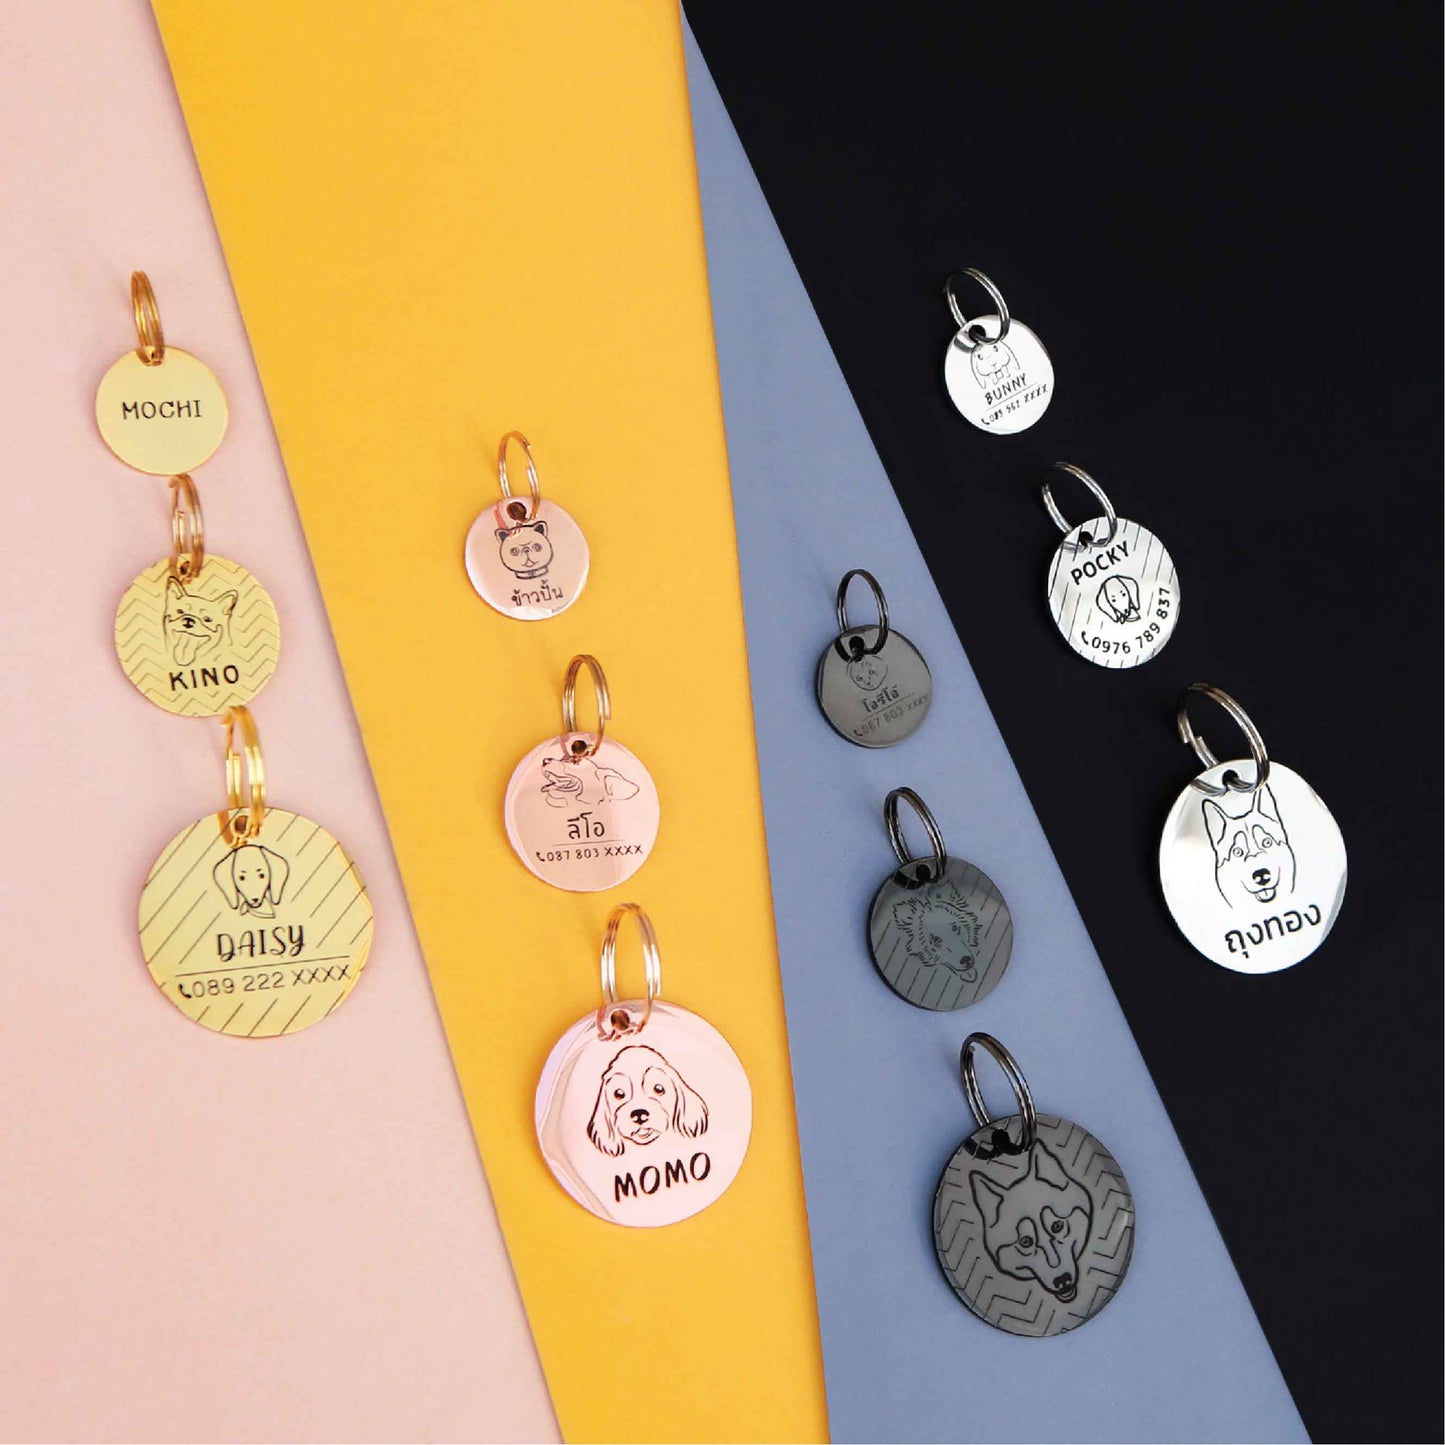 Pet ID tag gold stainless steel (THICK) Personalized engraved